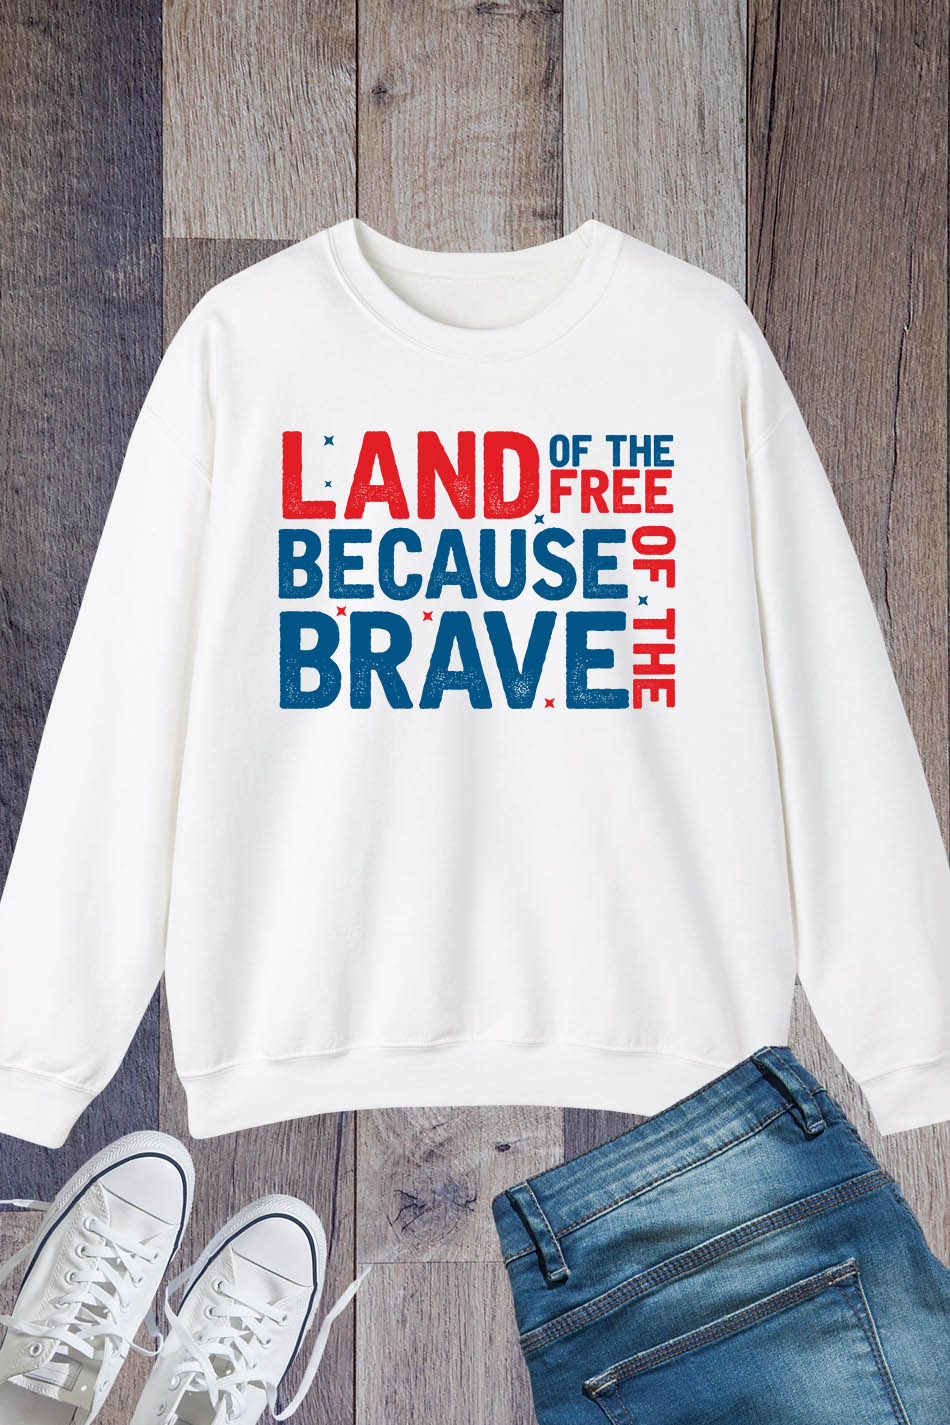 Land Of The Free Because of The Brave Sweatshirts